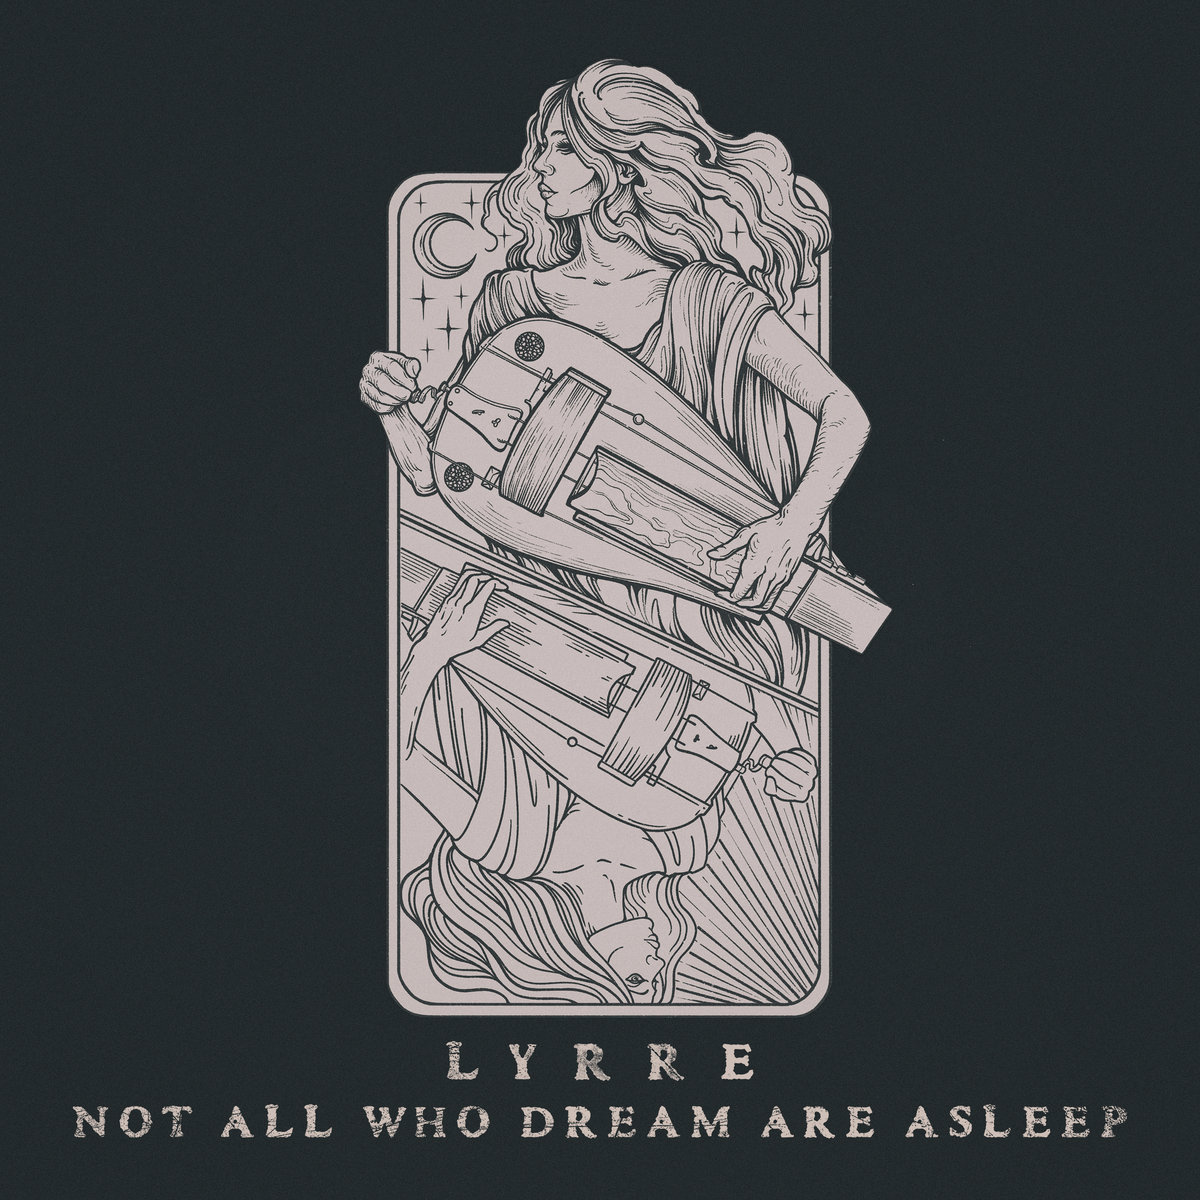 Lyrre - "Not All Who Dream Are Asleep" - 2023